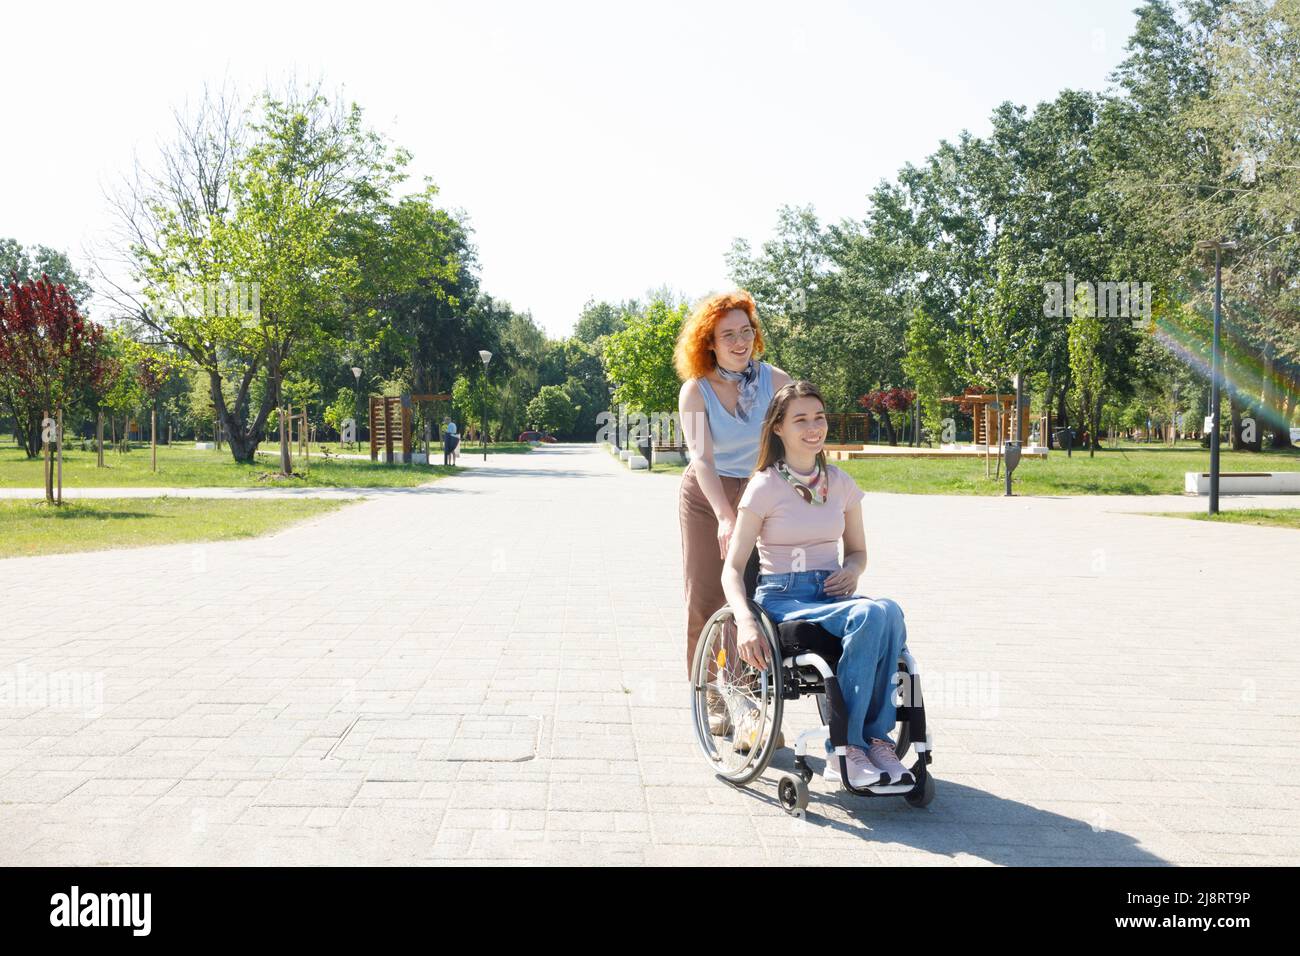 Two diverse female friends strolling through a park on a sunny summer day Stock Photo